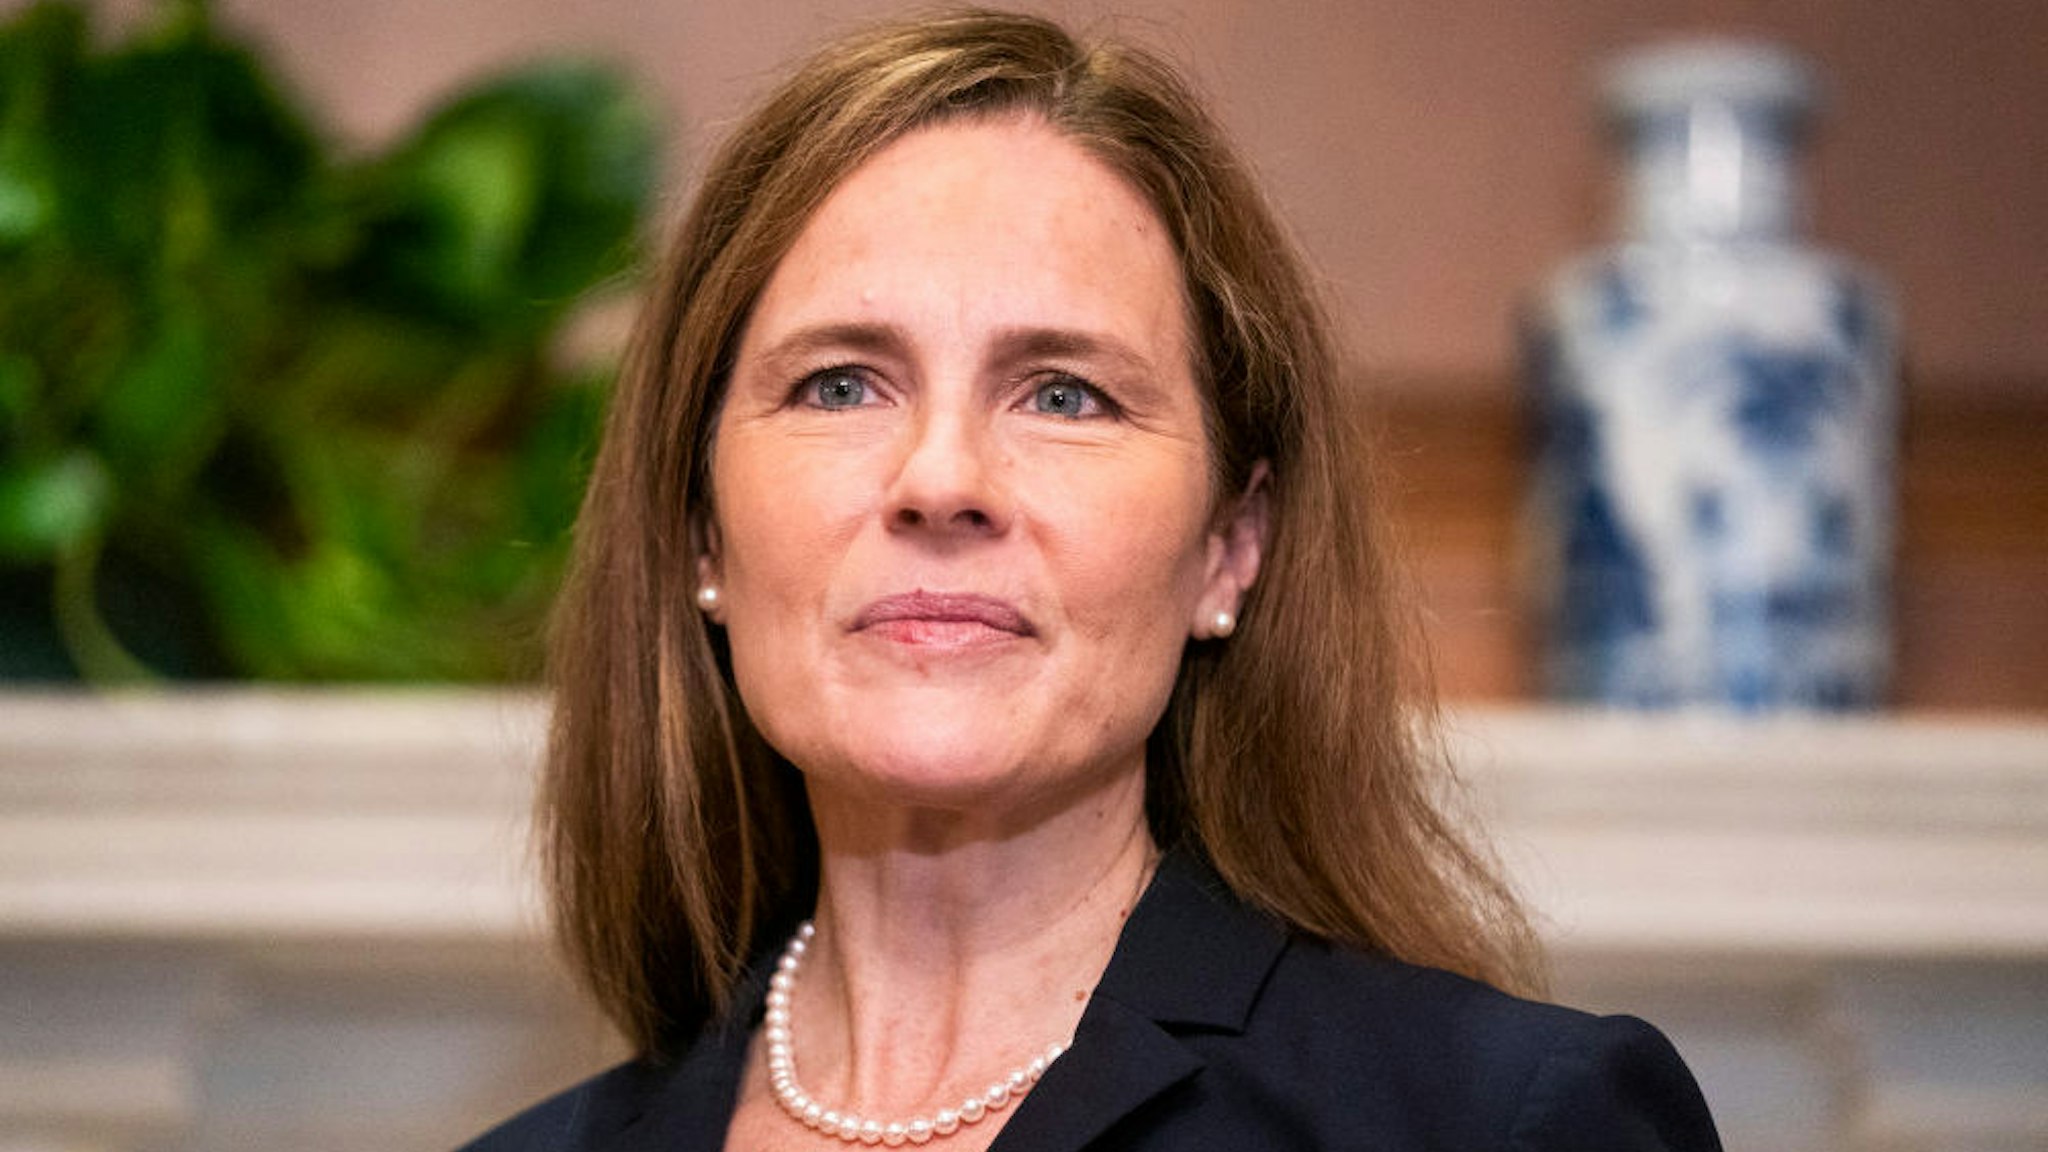 WASHINGTON, DC - OCTOBER 21: Supreme Court nominee Judge Amy Coney Barrett meets with U.S. Sen. Martha McSally (R-AZ) on October 21, 2020 in Washington, DC. President Donald Trump nominated Barrett to replace Justice Ruth Bader Ginsburg after her death.